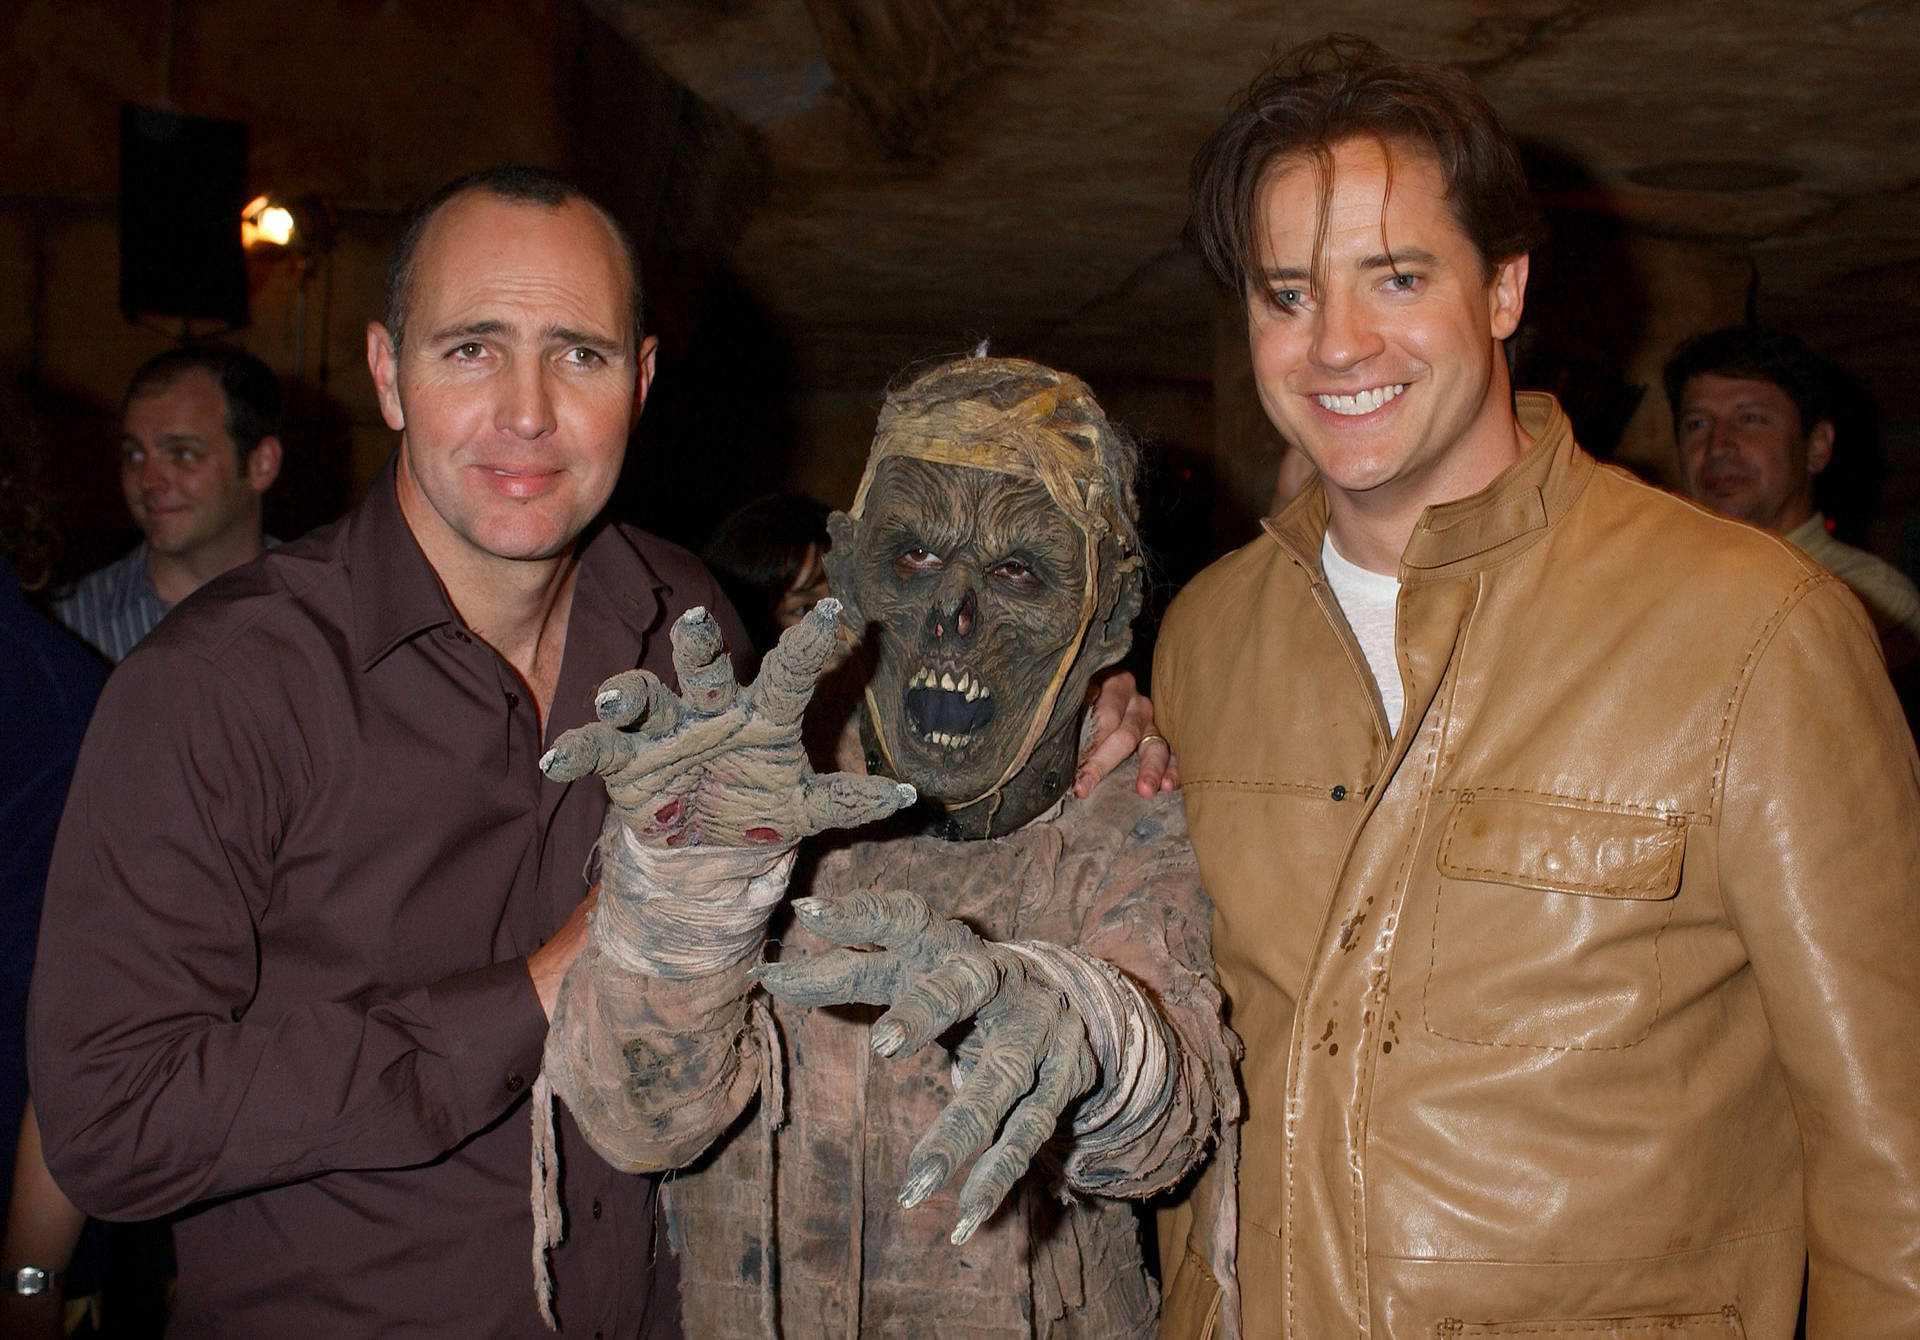 Arnold Vosloo with 'The Mummy' Memorabilia in Hand Wallpaper